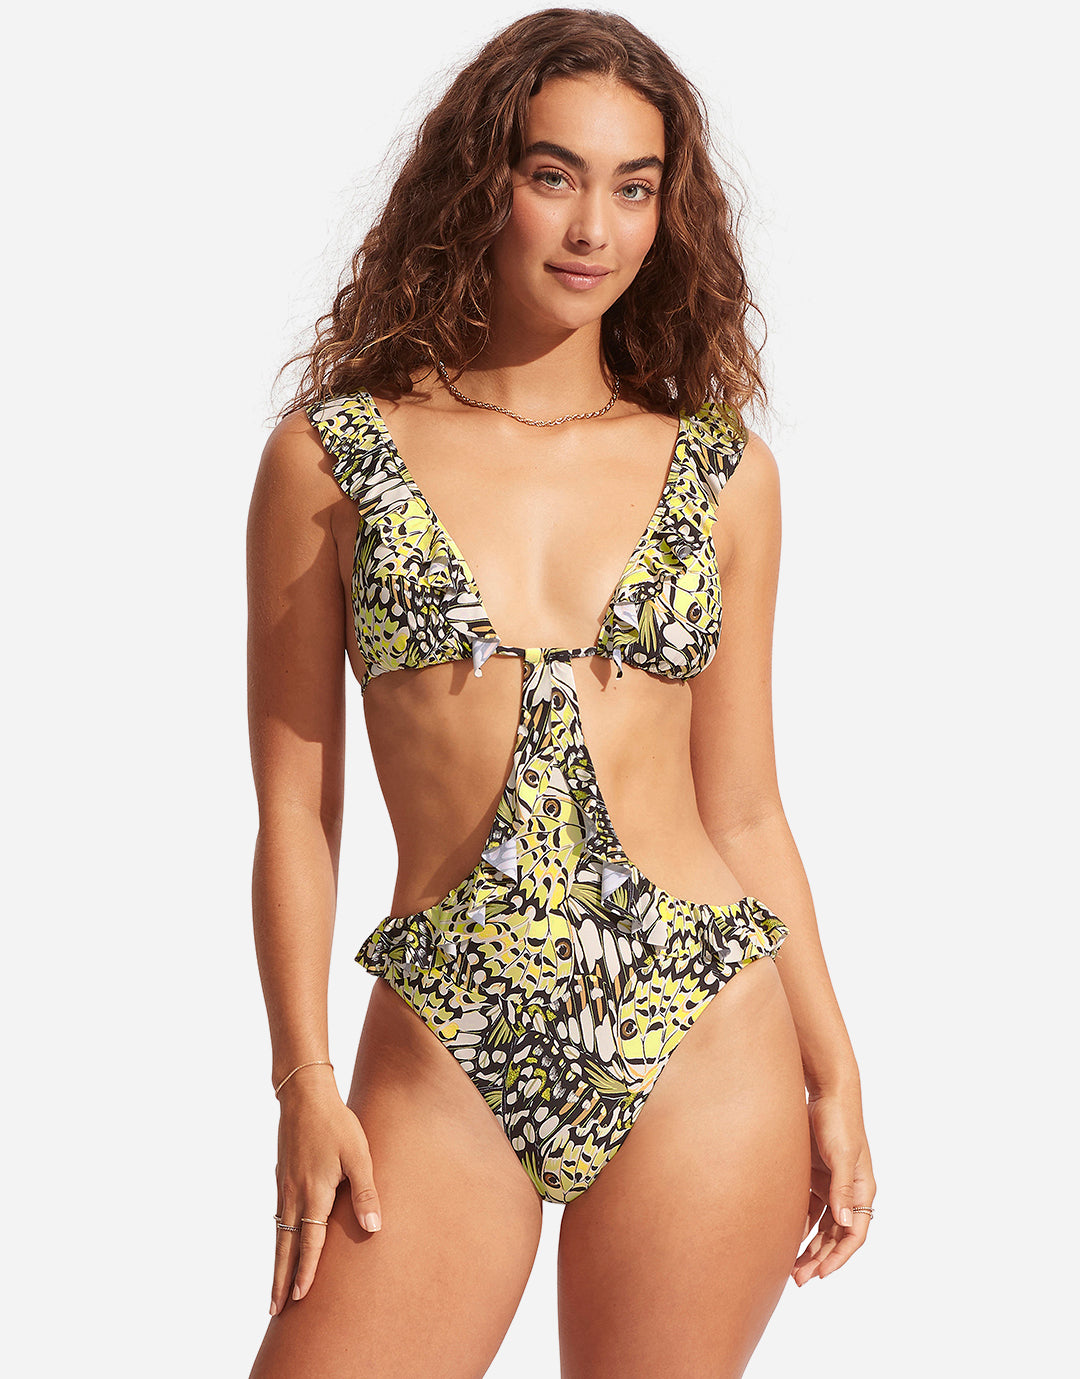 Swimsuits For An Inverted Triangle Shape